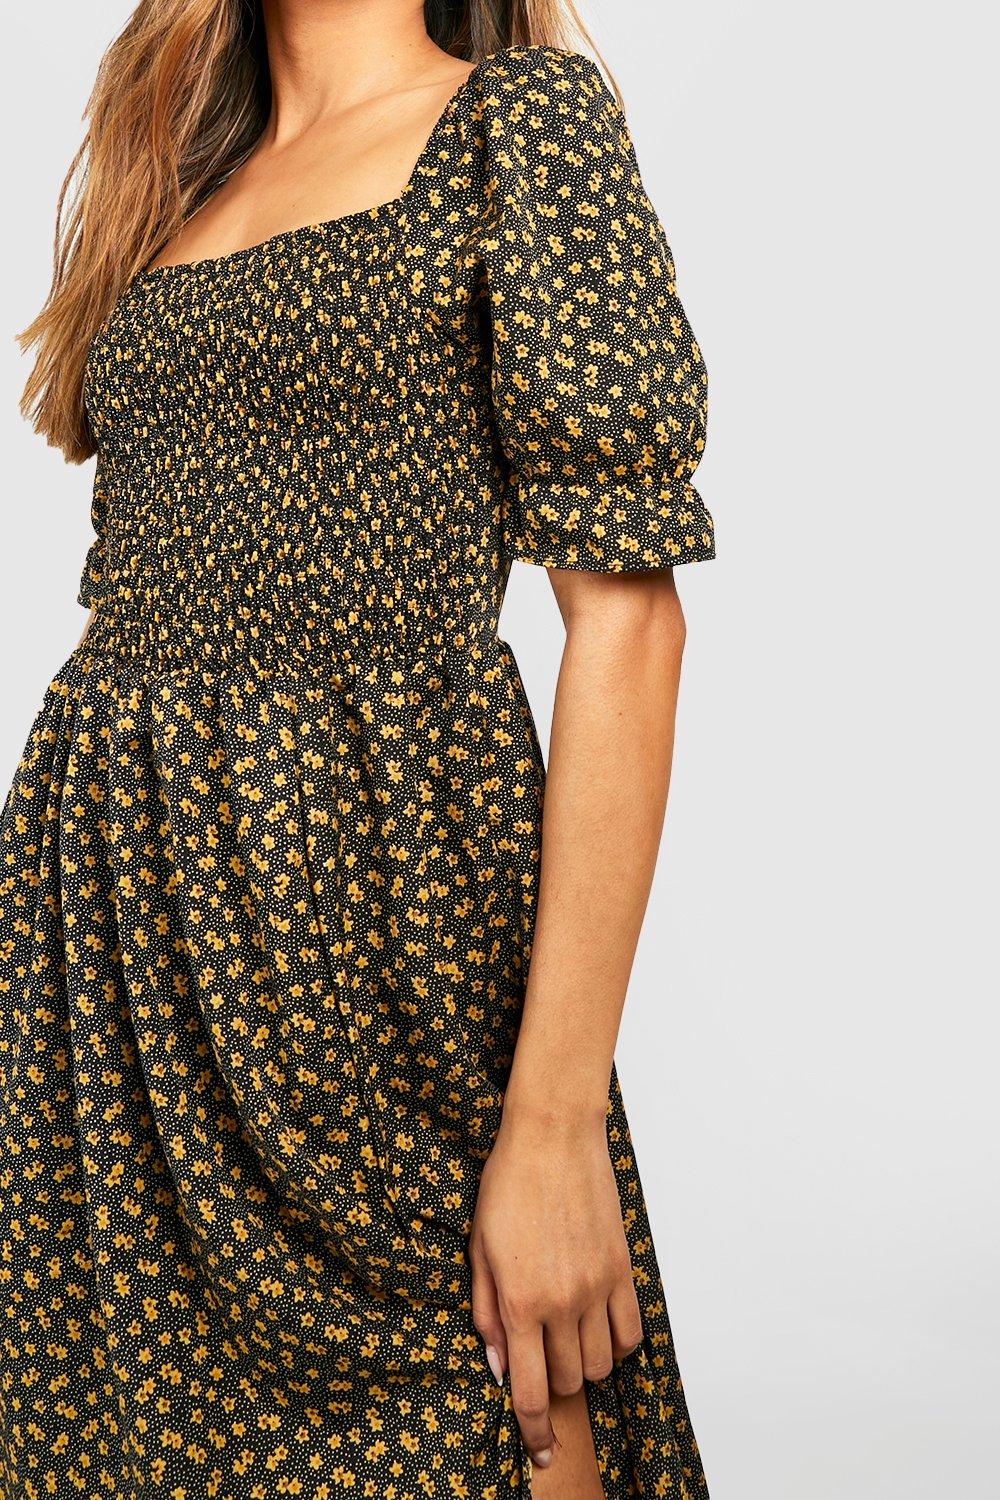 Woven Ditsy Floral Maternity Dress